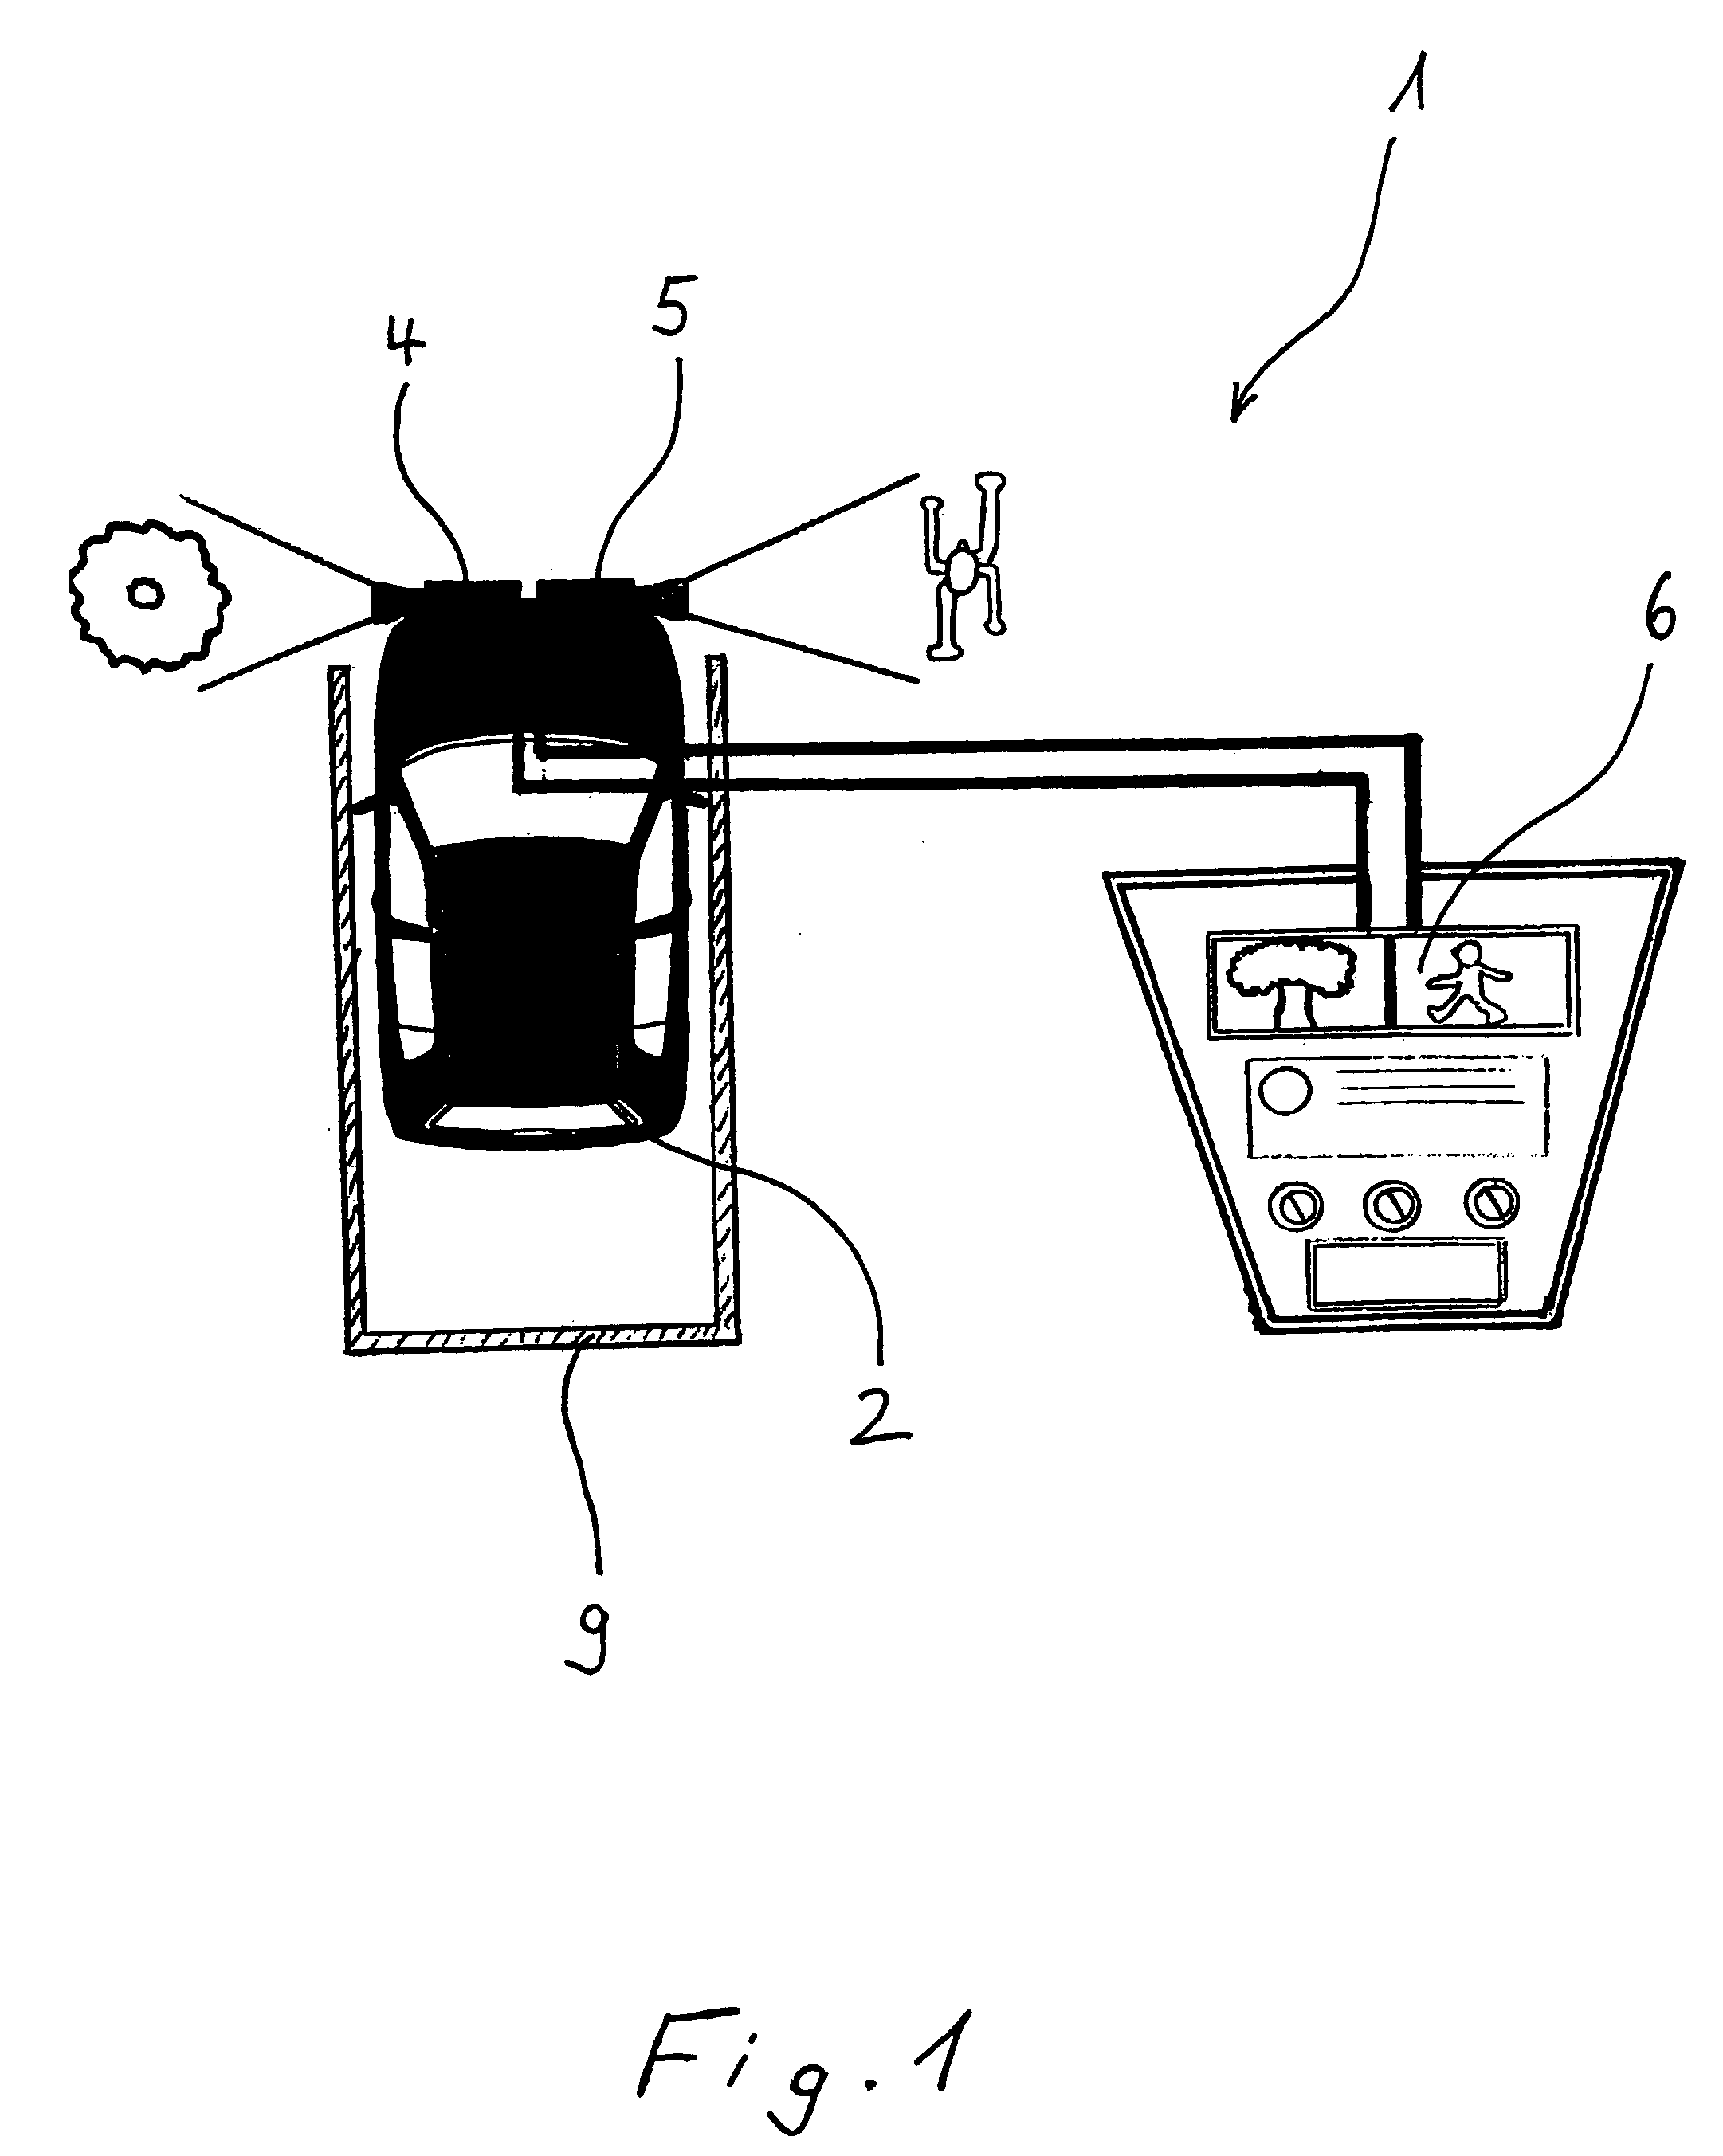 Monitoring device for a motor vehicle